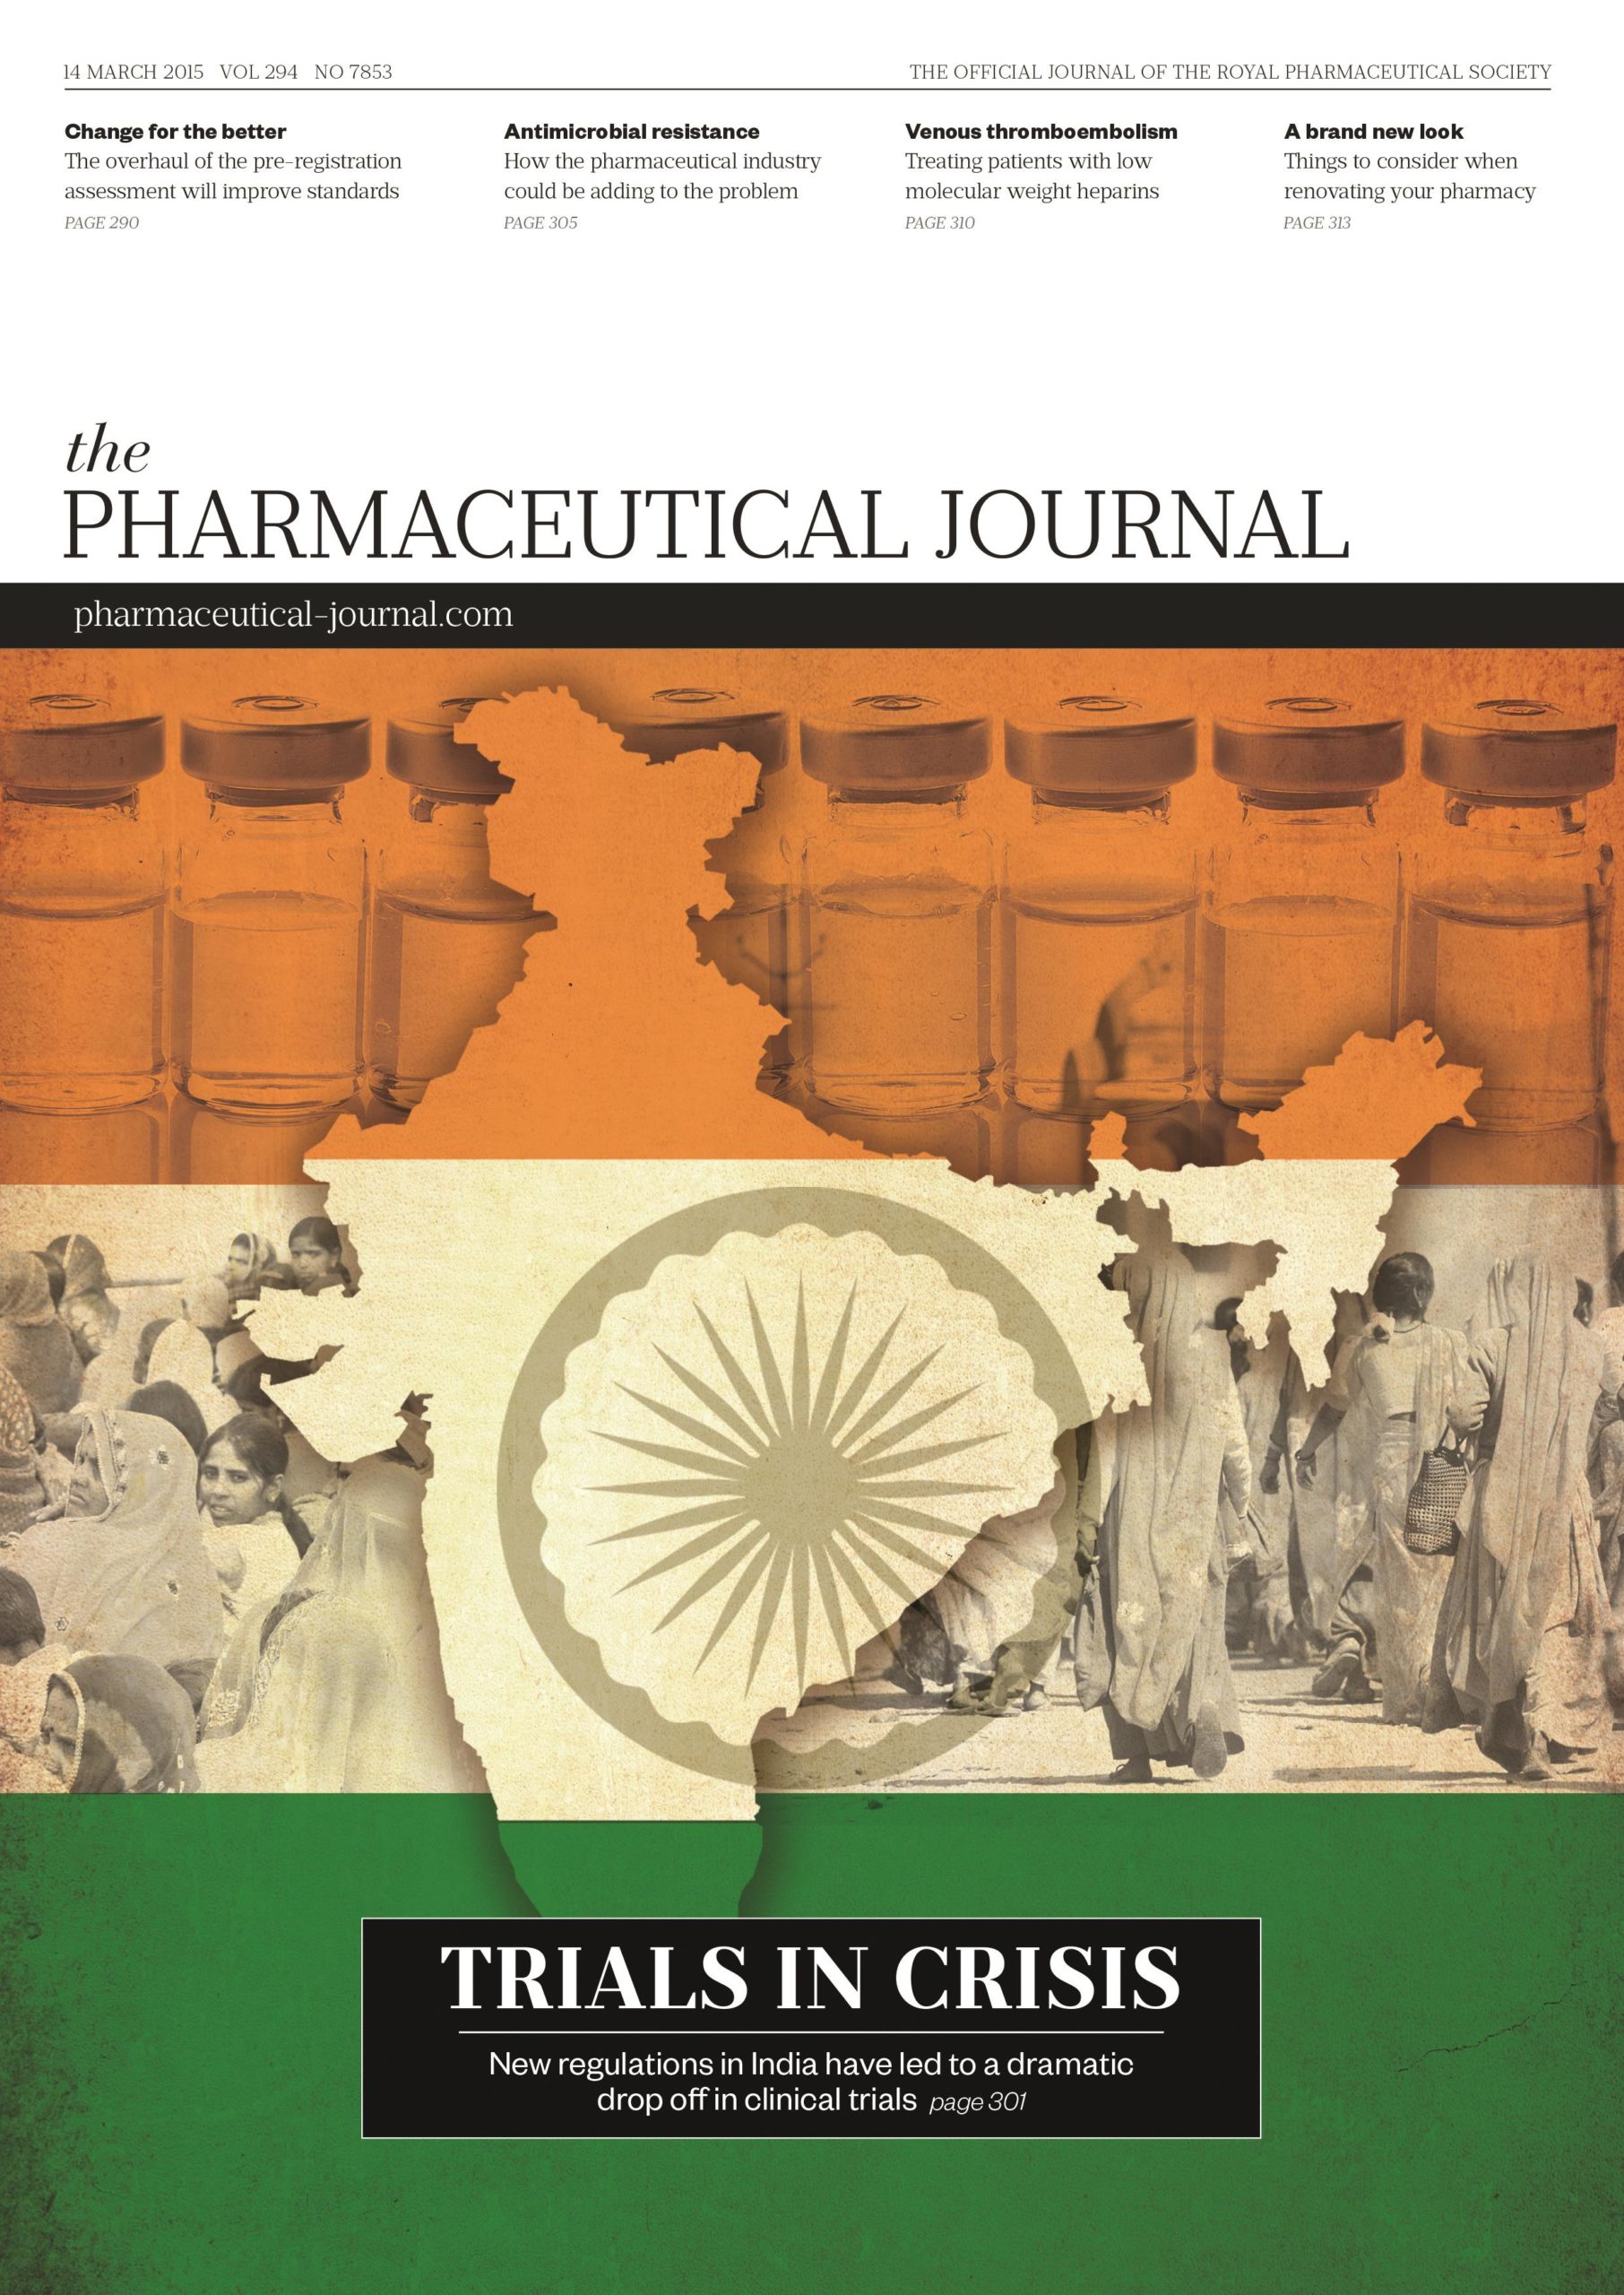 Publication issue cover for PJ, 14 March 2015, Vol 294, No 7853